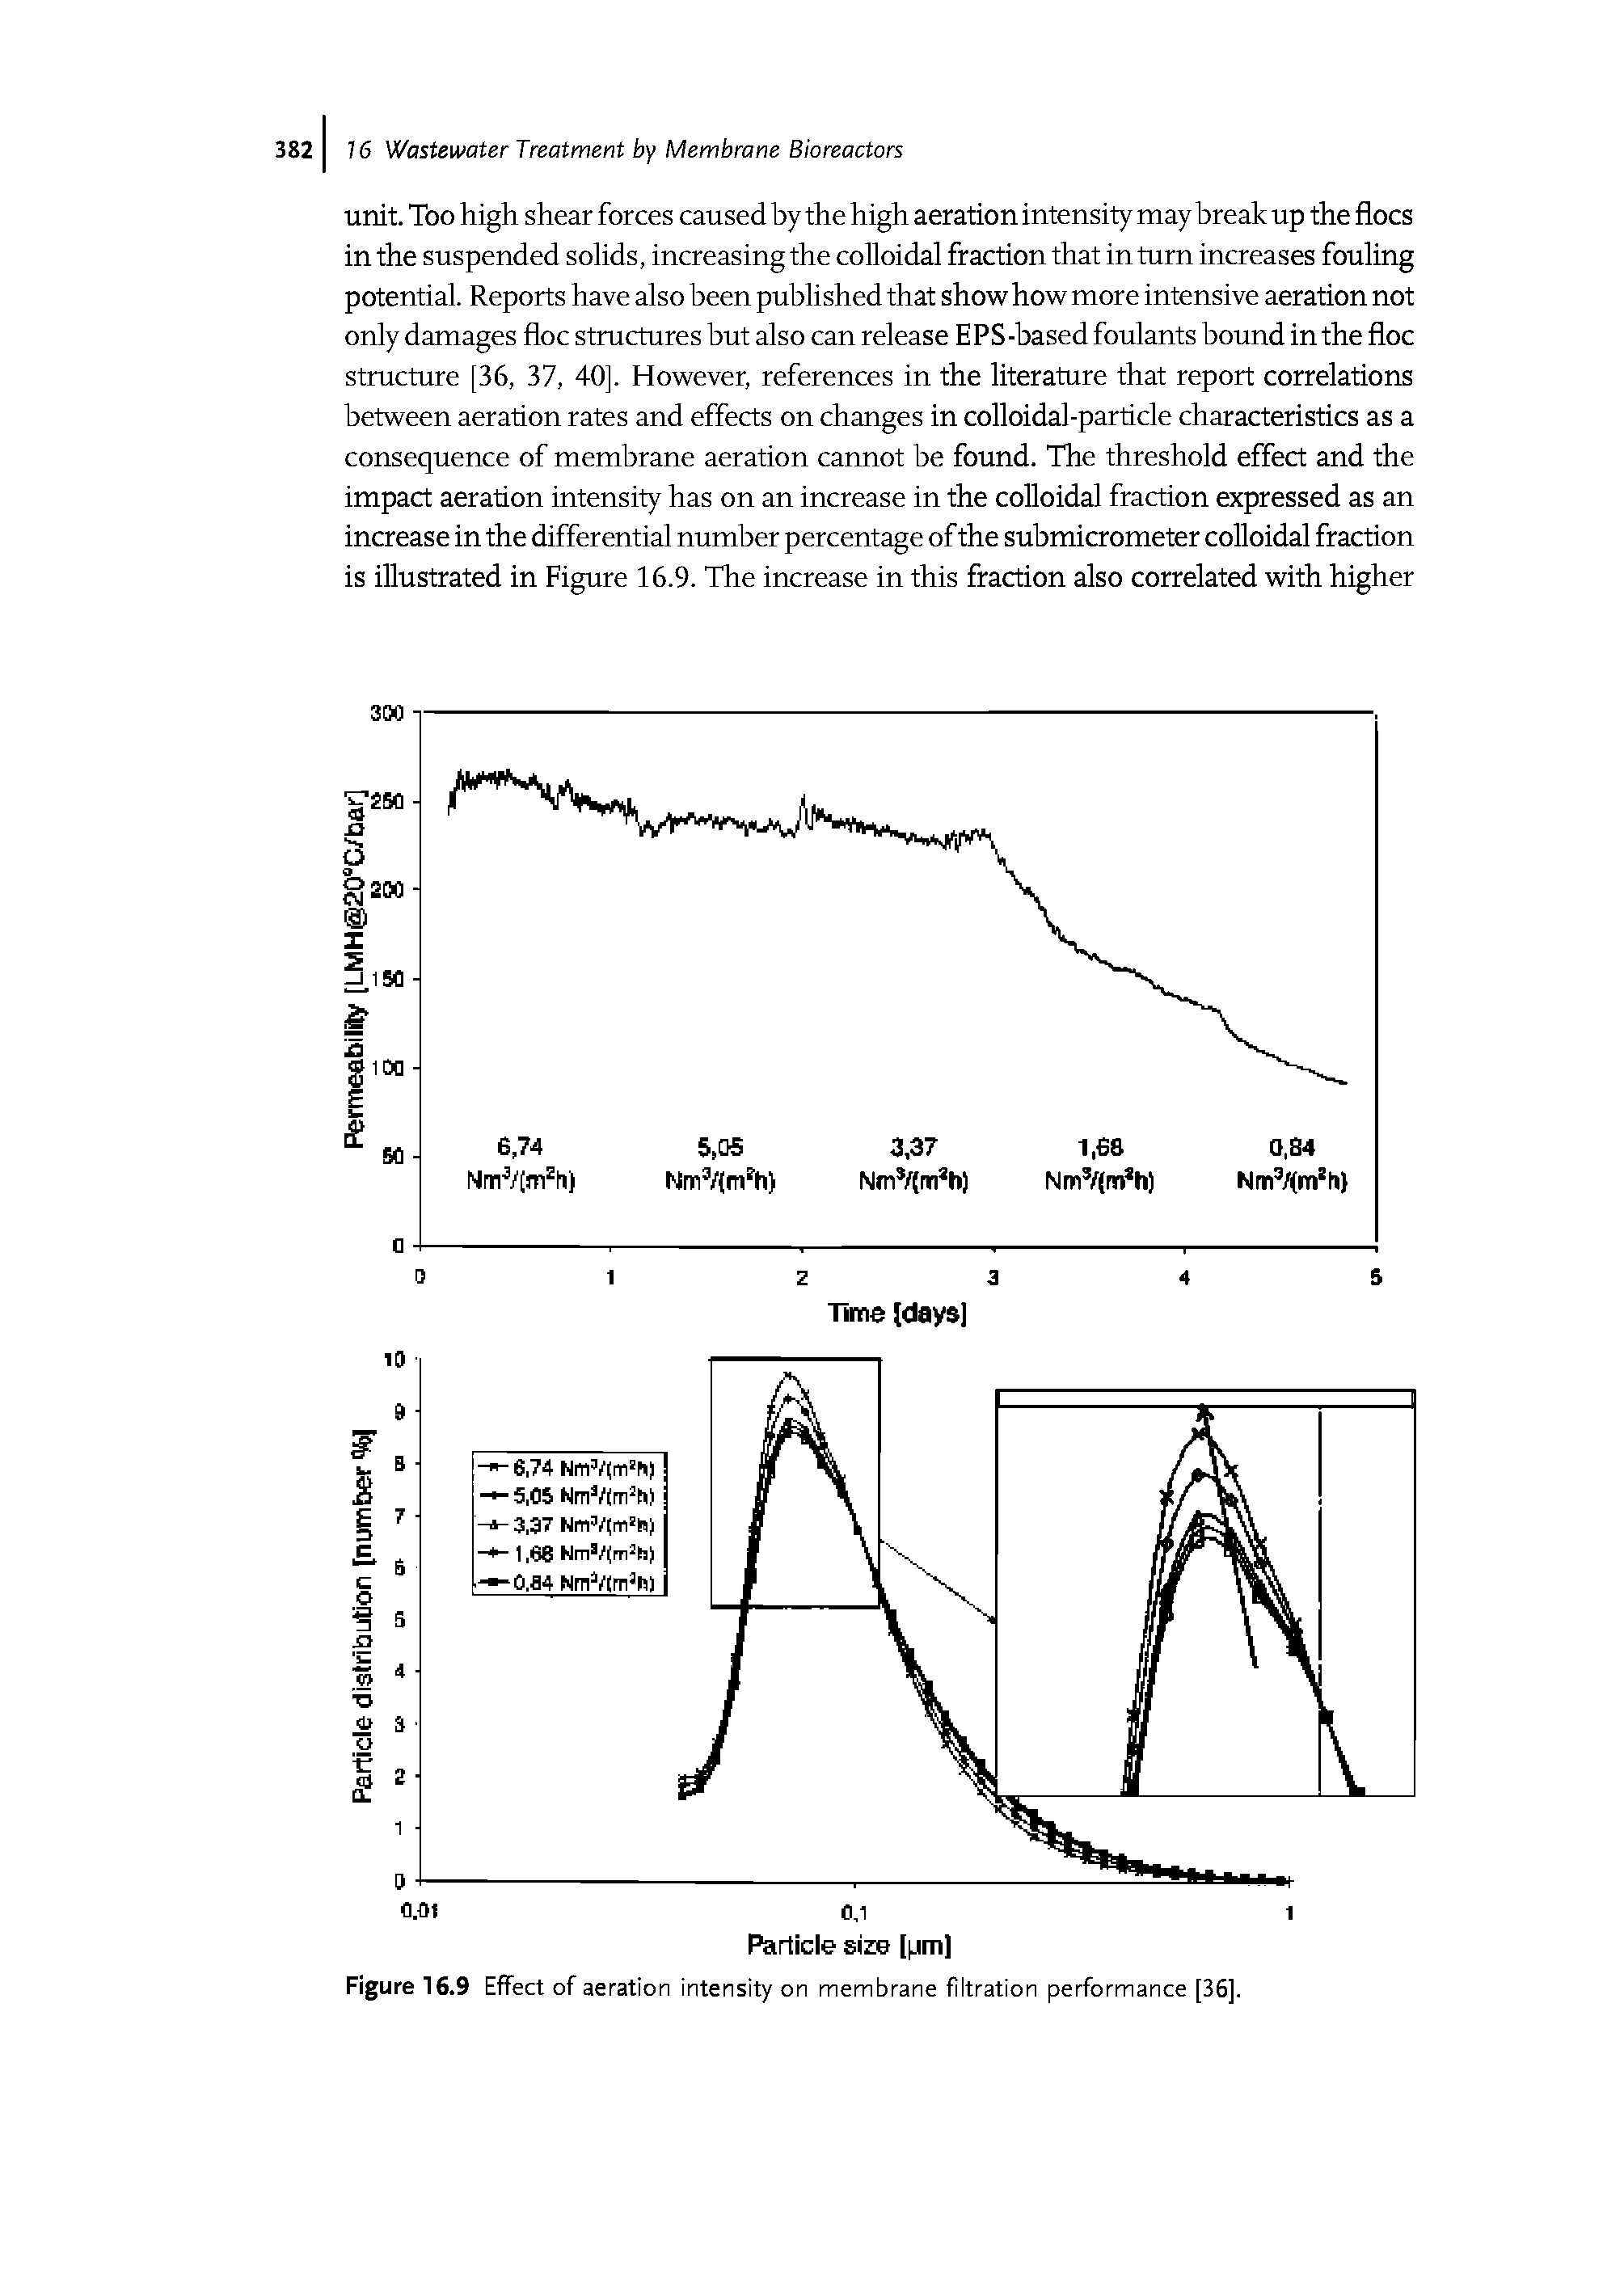 Figure 16.9 Effect of aeration intensity on membrane filtration performance [36].